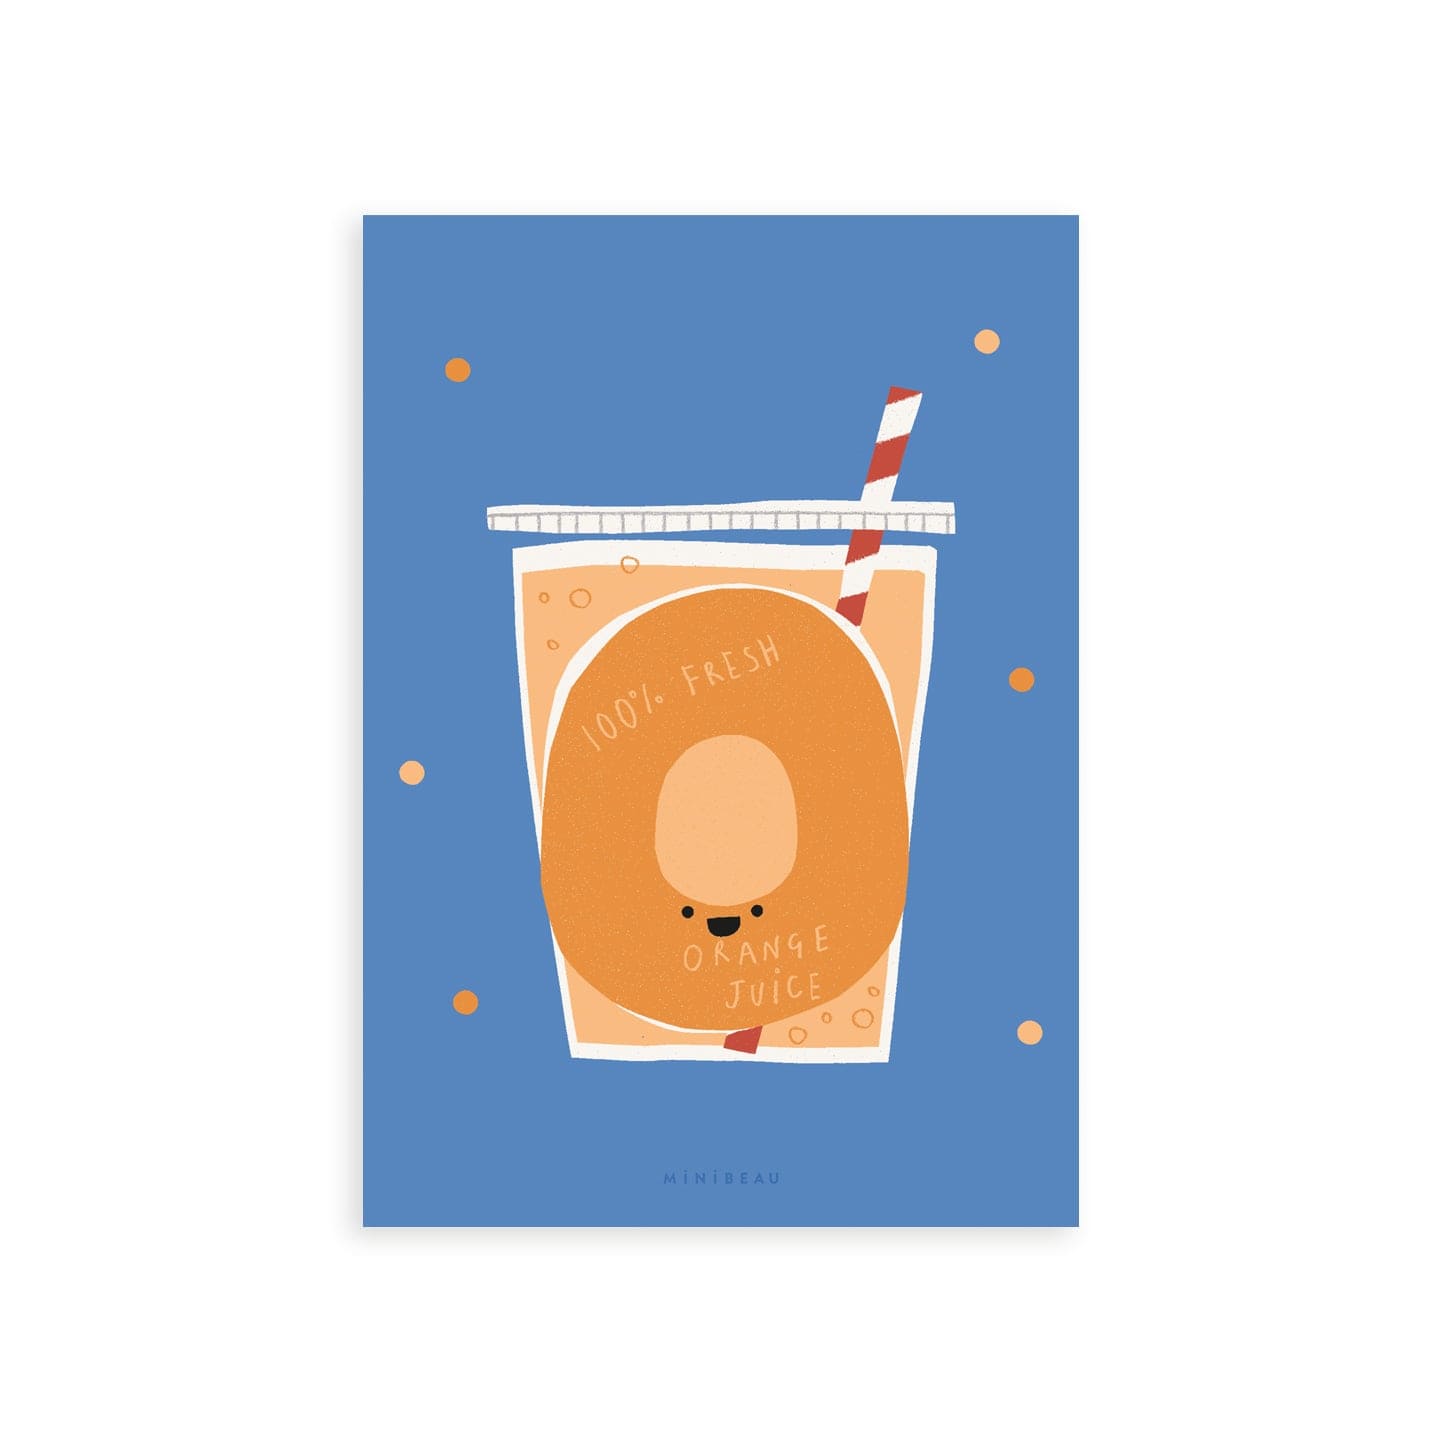 Our Happy Alphabet 'O' Art Print shows a glass of fresh orange juice, with a red and white straw in it. There is an orange O on the glass with the words 100% fresh orange juice on. All on a blue background with orange dots.